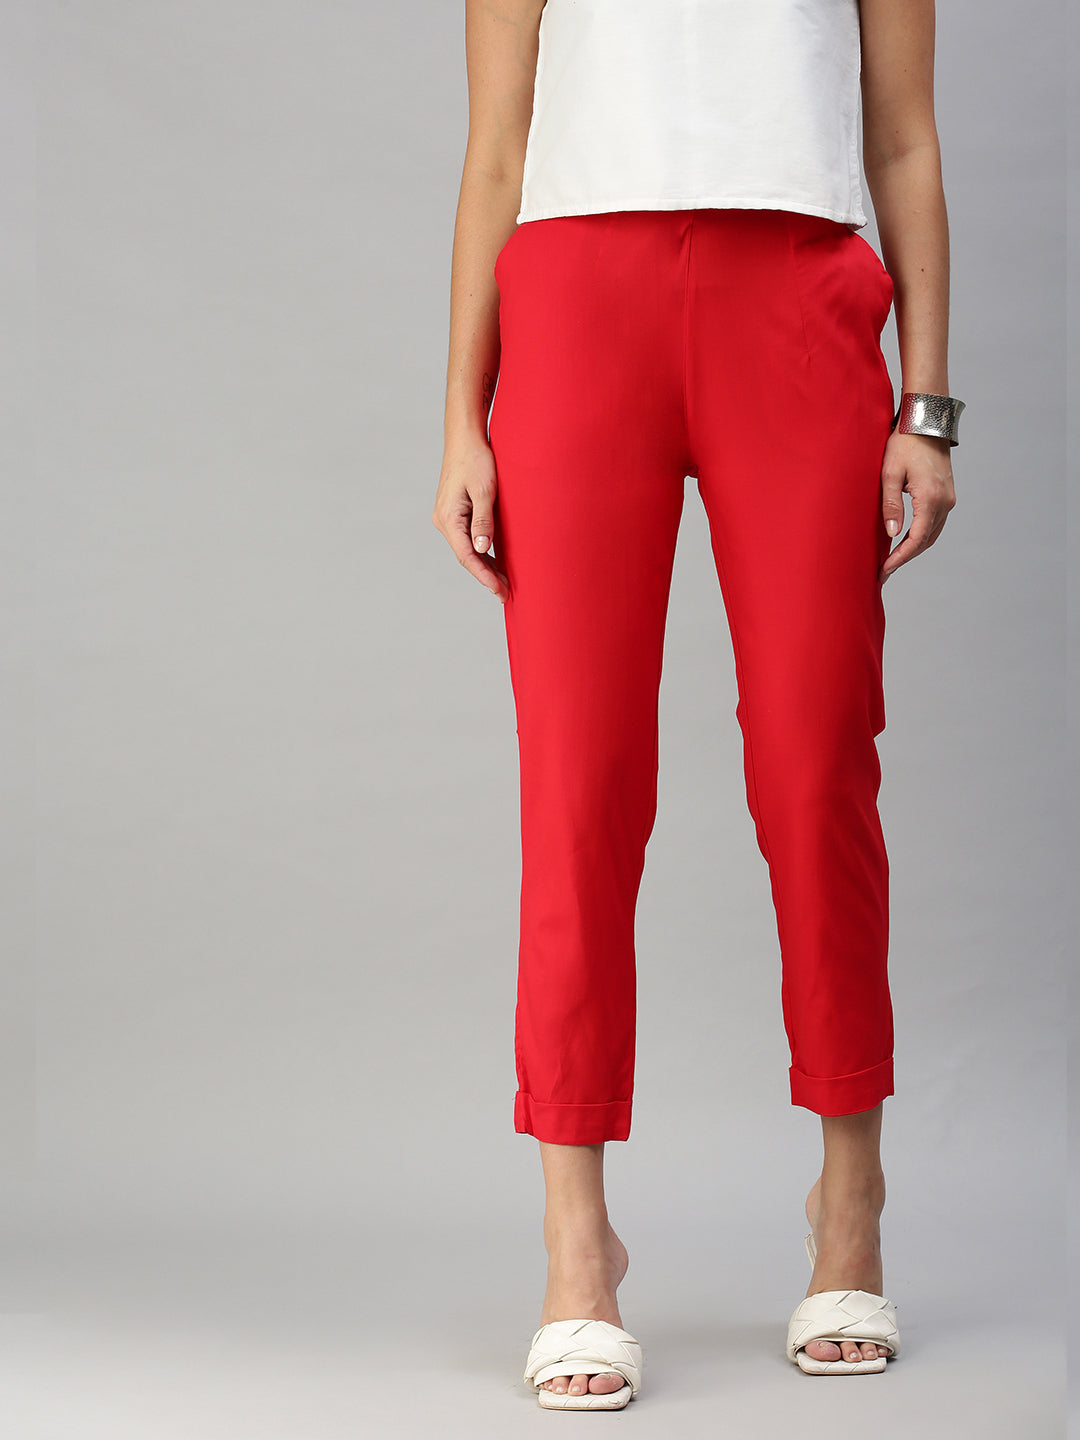 White Pant for Women | Ankle Trousers women | SAINLY